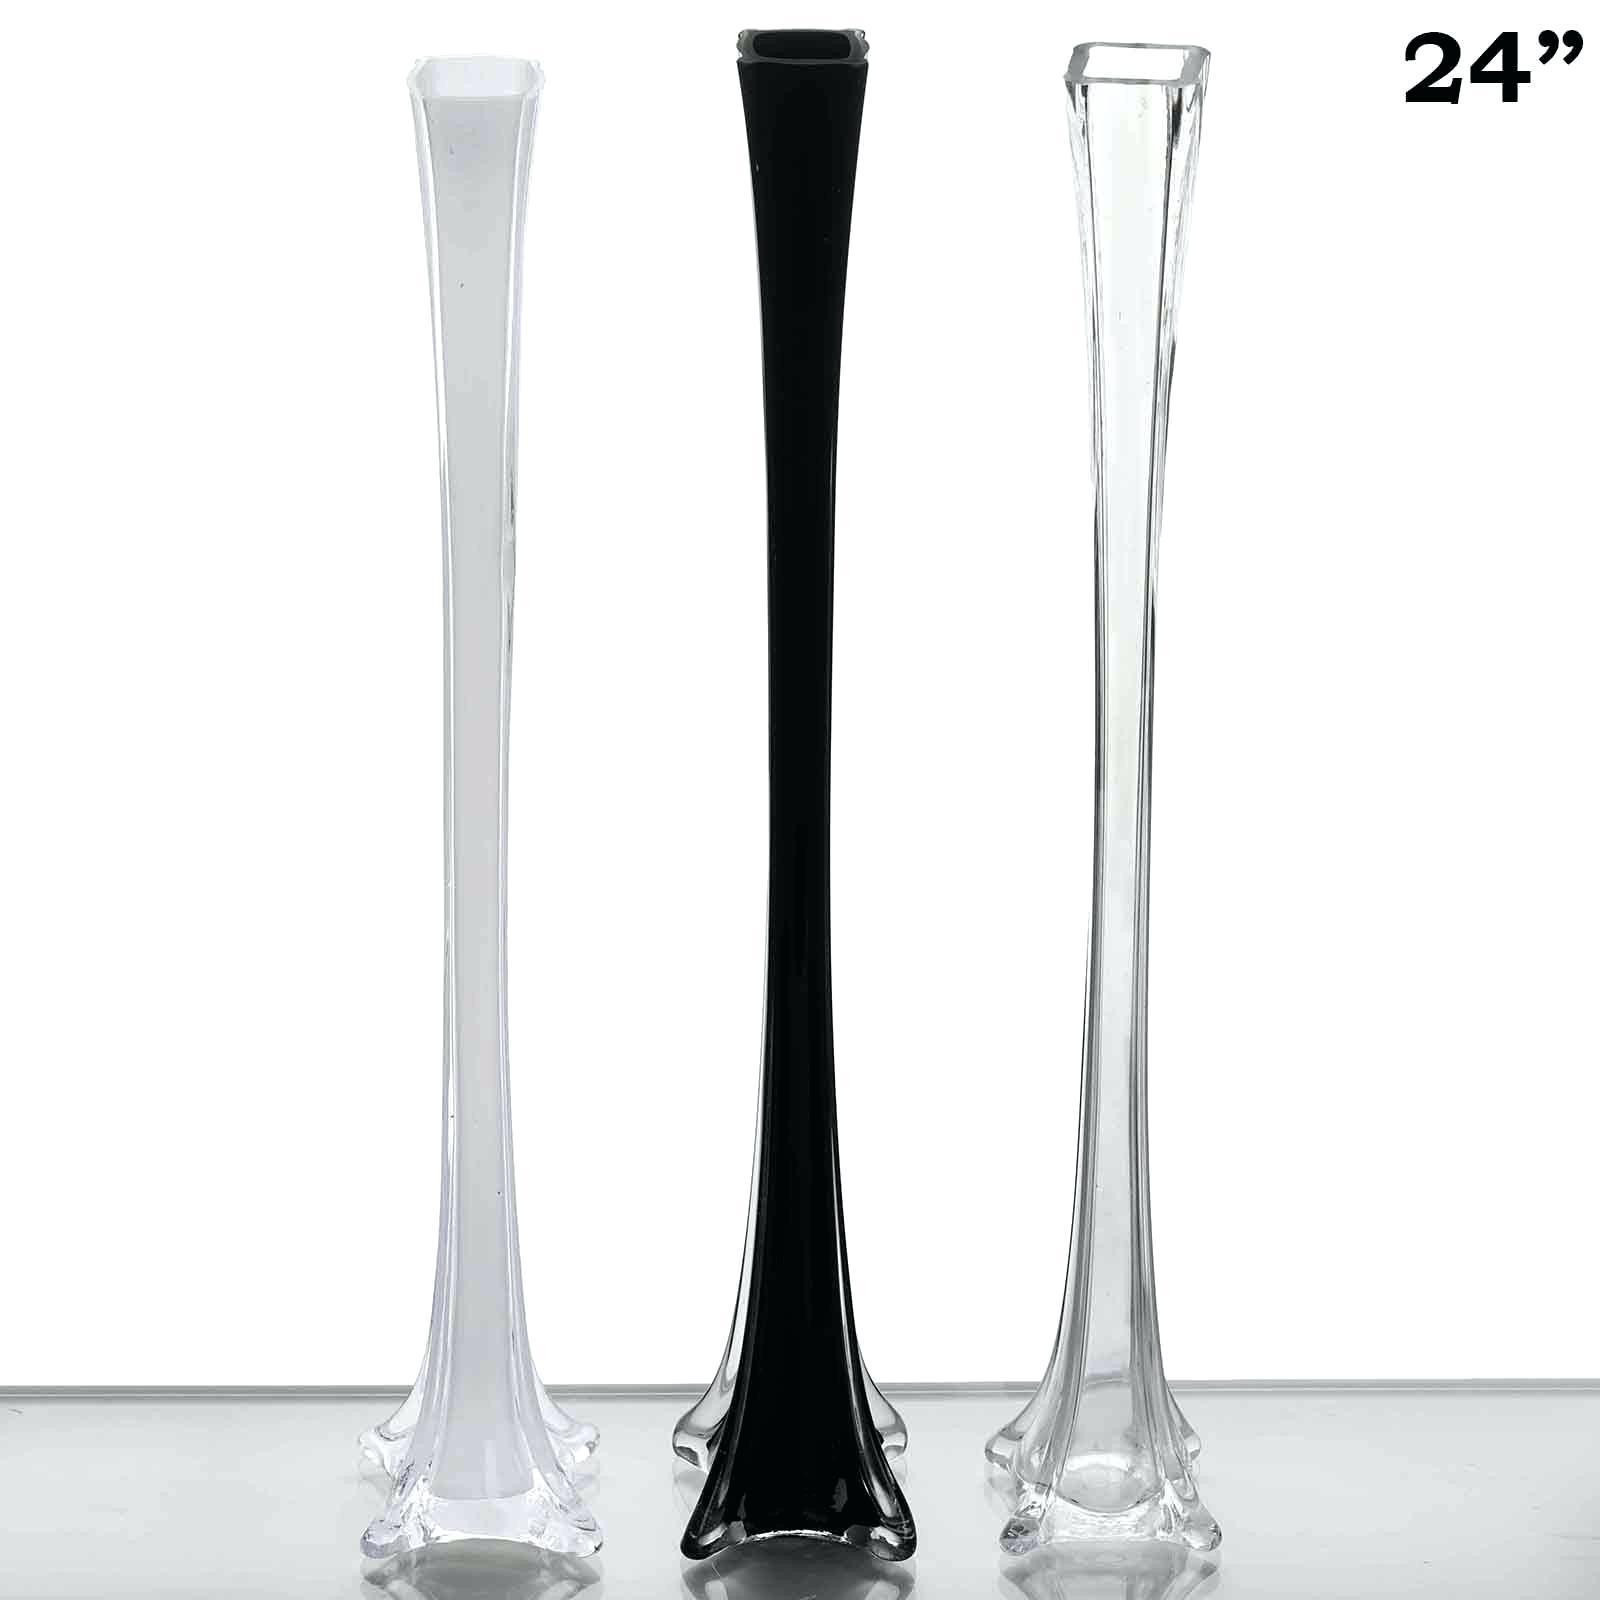 17 Awesome 24 Inch Tall Cylinder Vases 2024 free download 24 inch tall cylinder vases of glass vases with lids collection 24 inch vases bulk 23 5 flared in glass vases with lids images fantastic chair decor ideas from living room vases wholesale aw